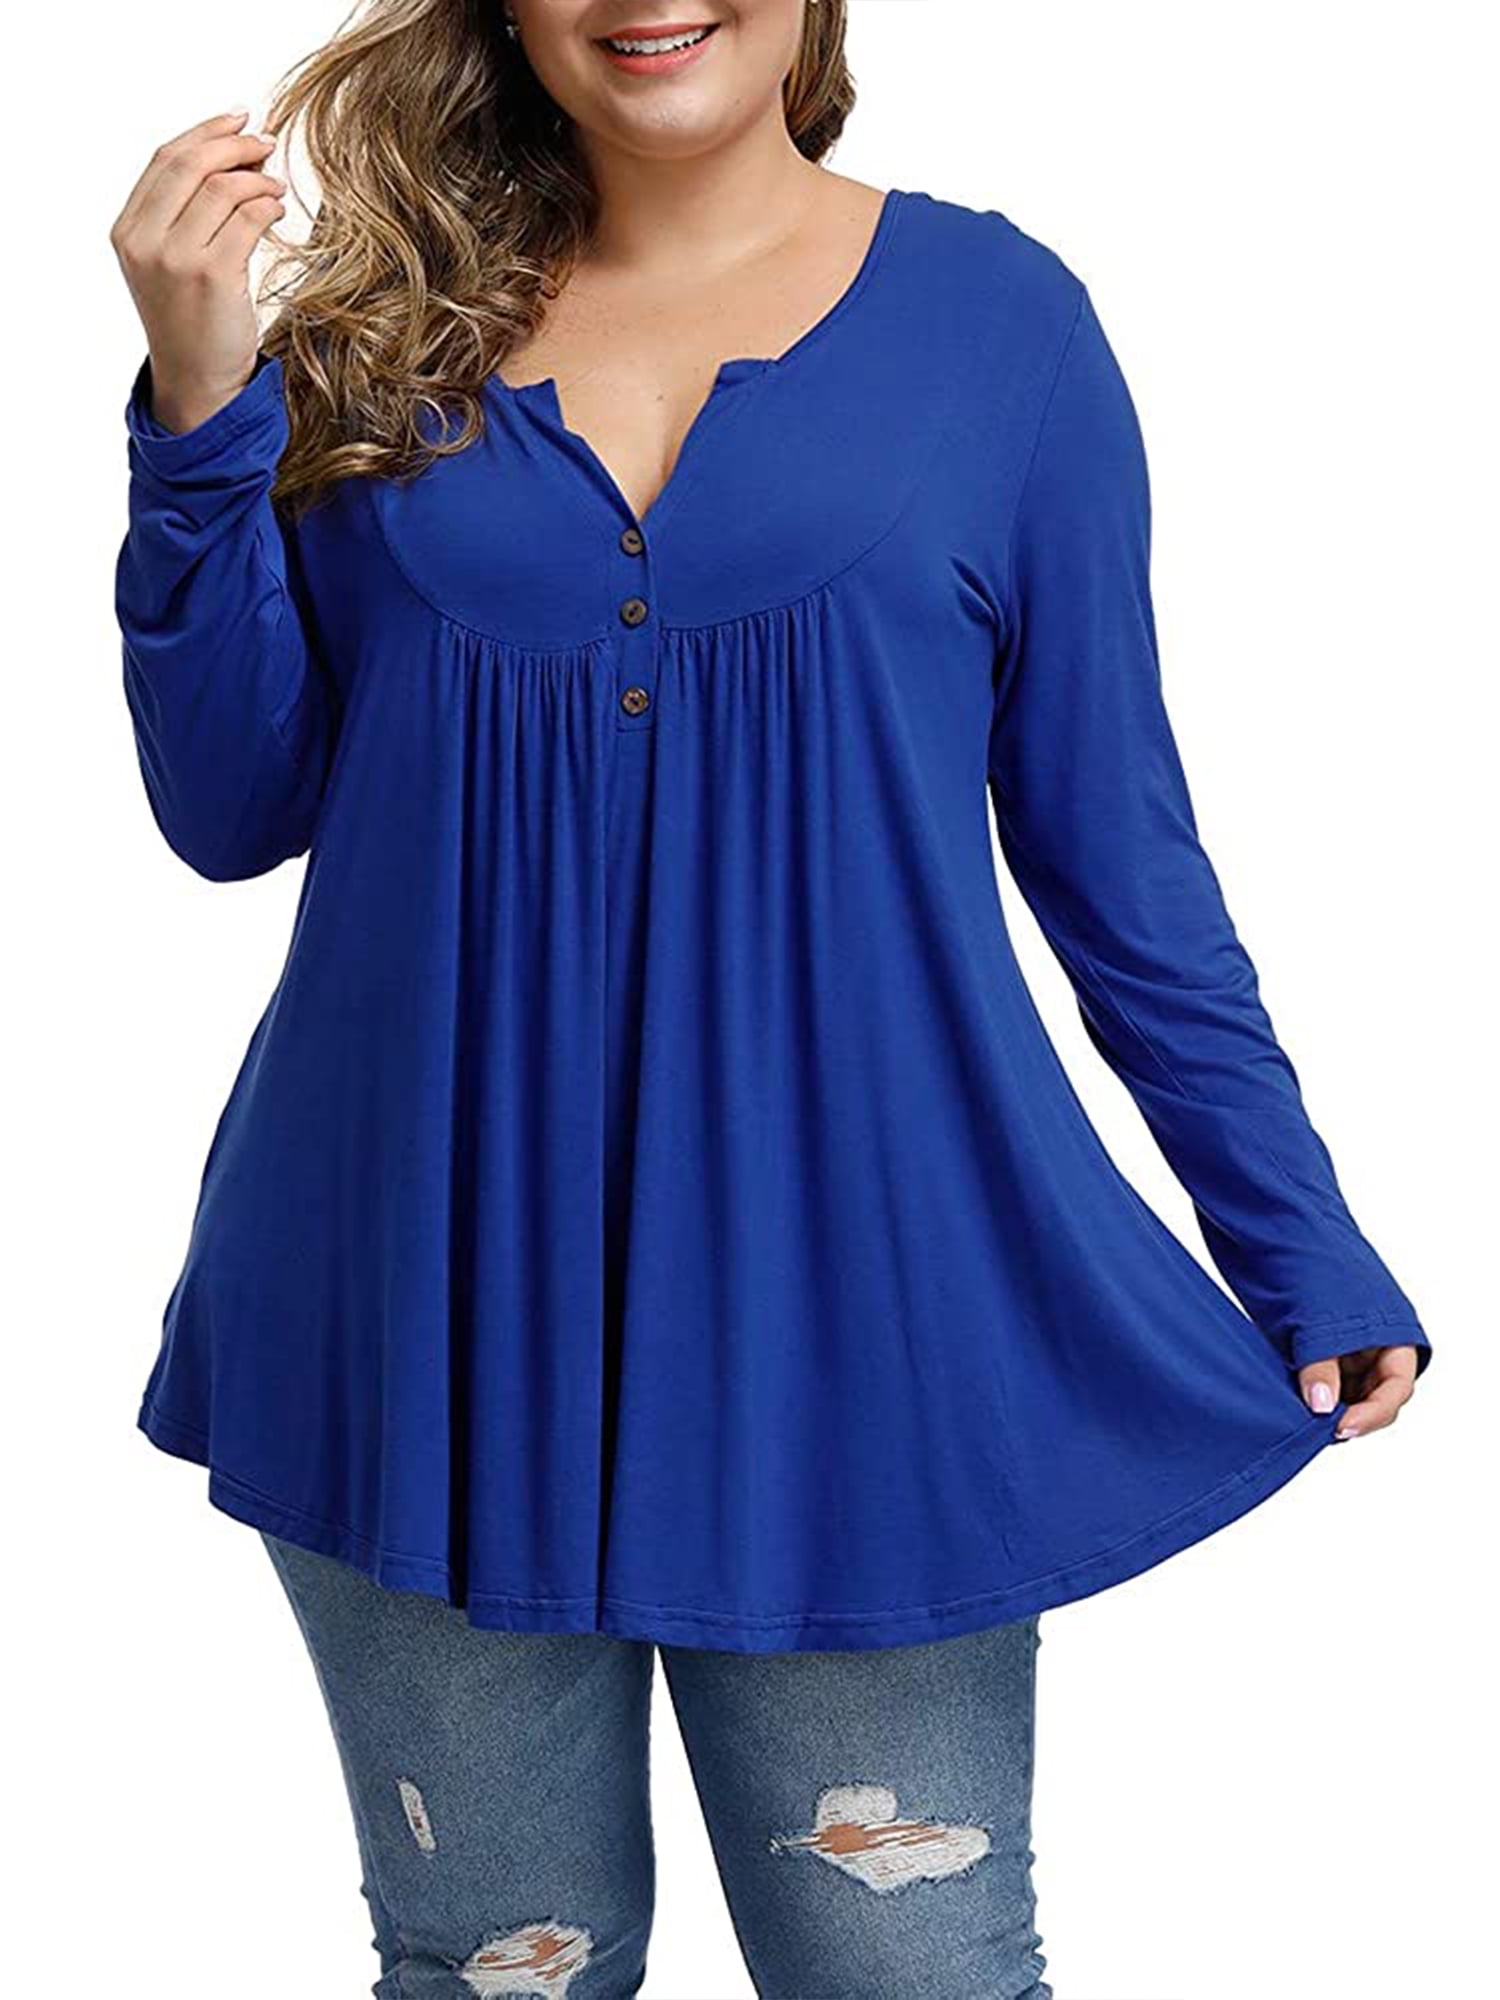 Women's Plus Size Henley Shirt Long Sleeve Henley V Neck Tunic Tops Buttons Up Pleated Blouse Shirts